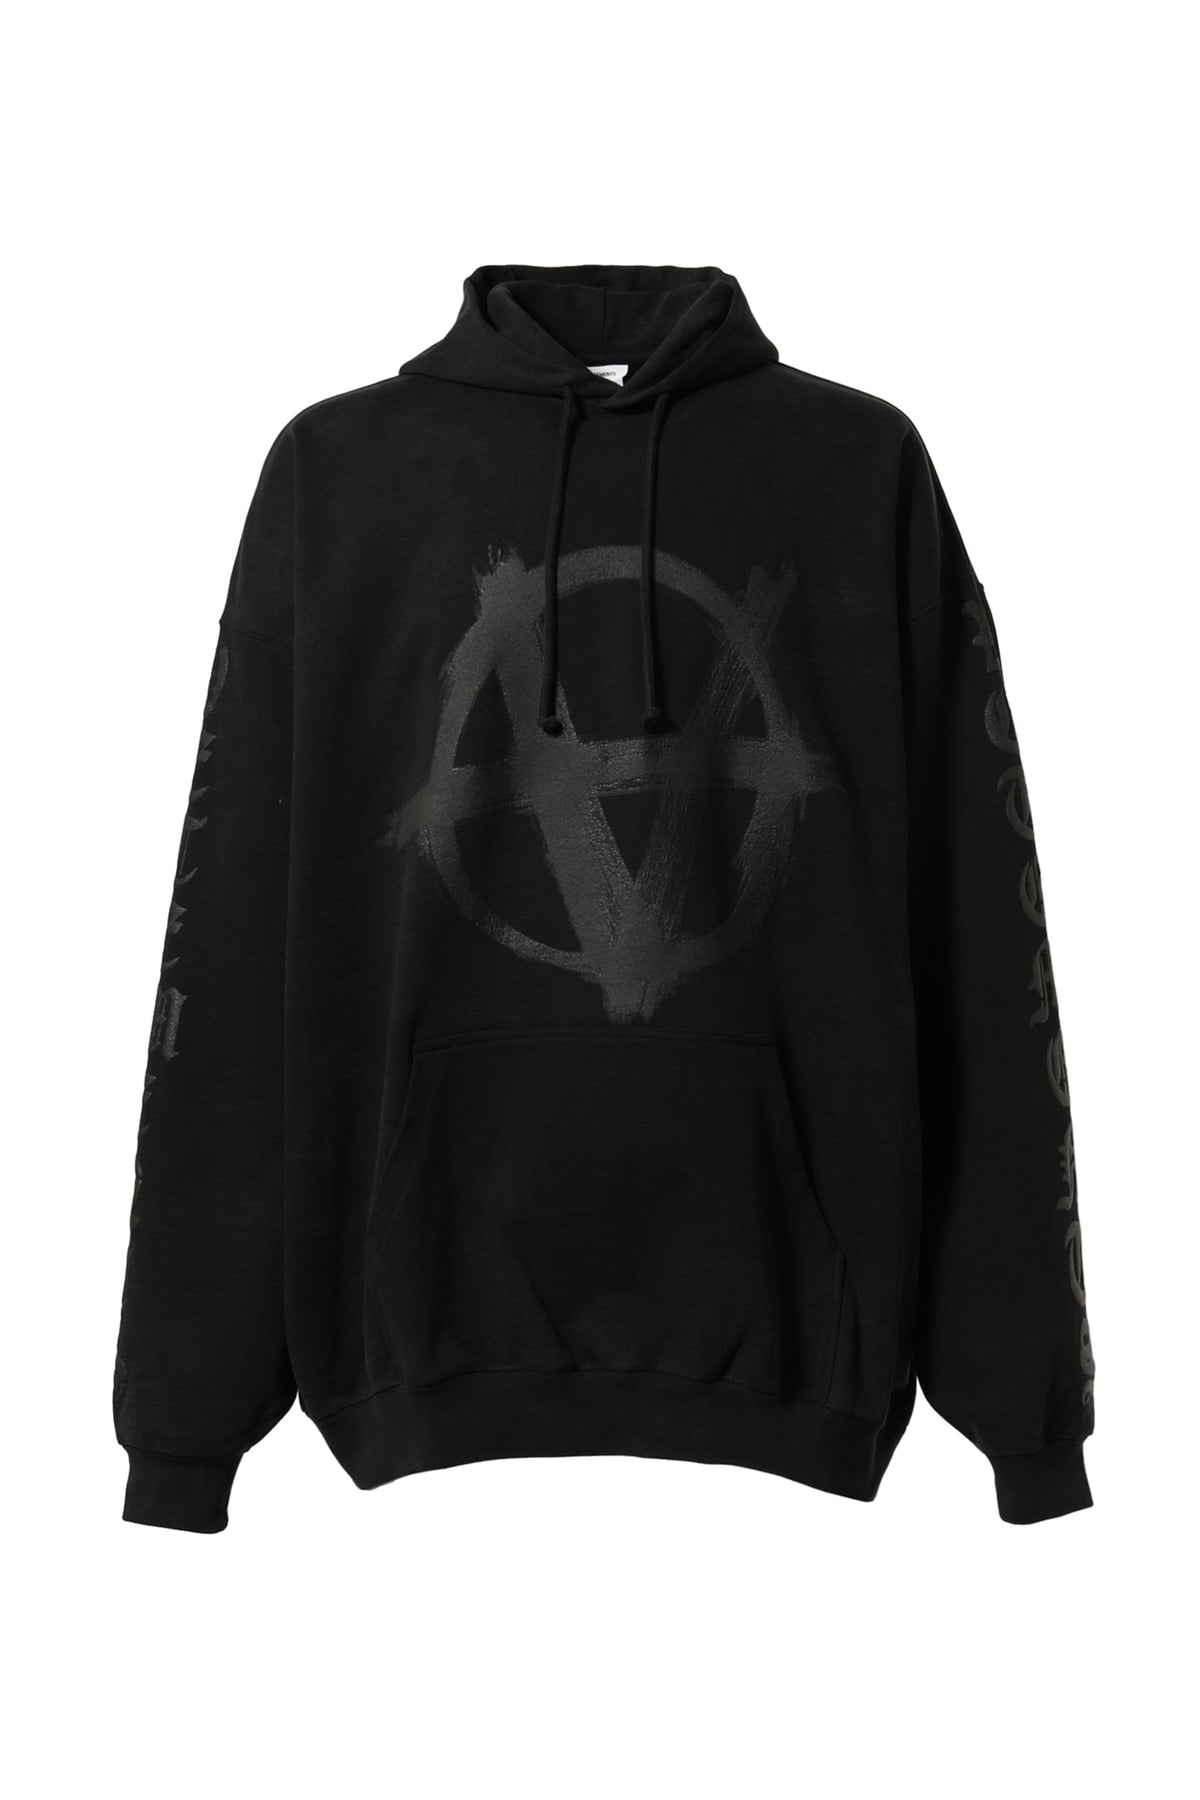 REVERSE ANARCHY HOODIE / WASHED BLK BLK